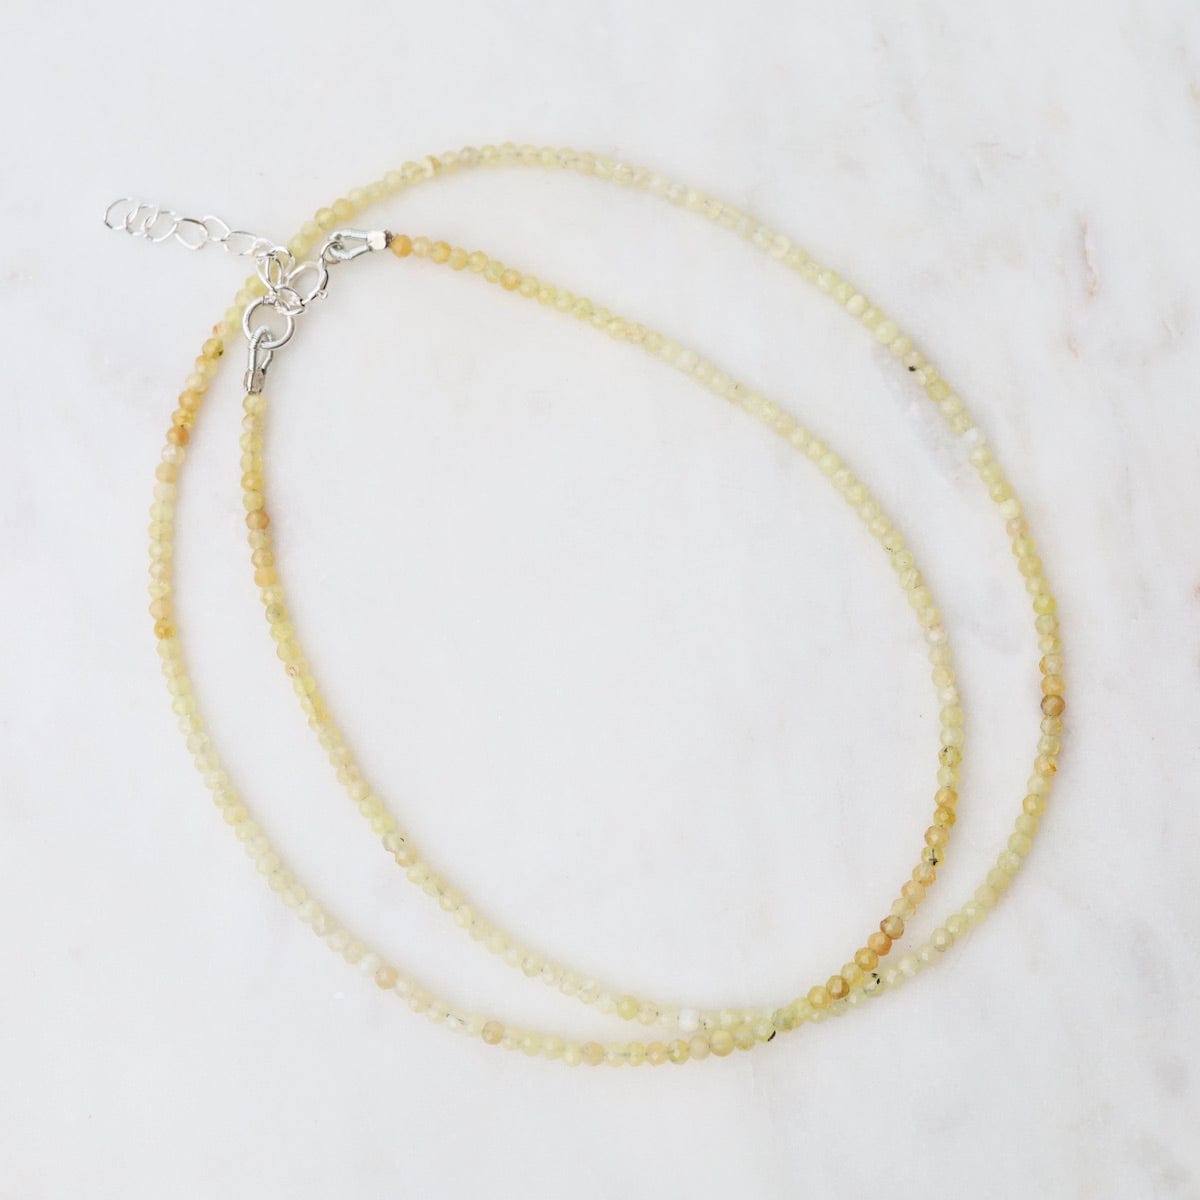 NKL Simple Stone Necklace - Yellow Jade